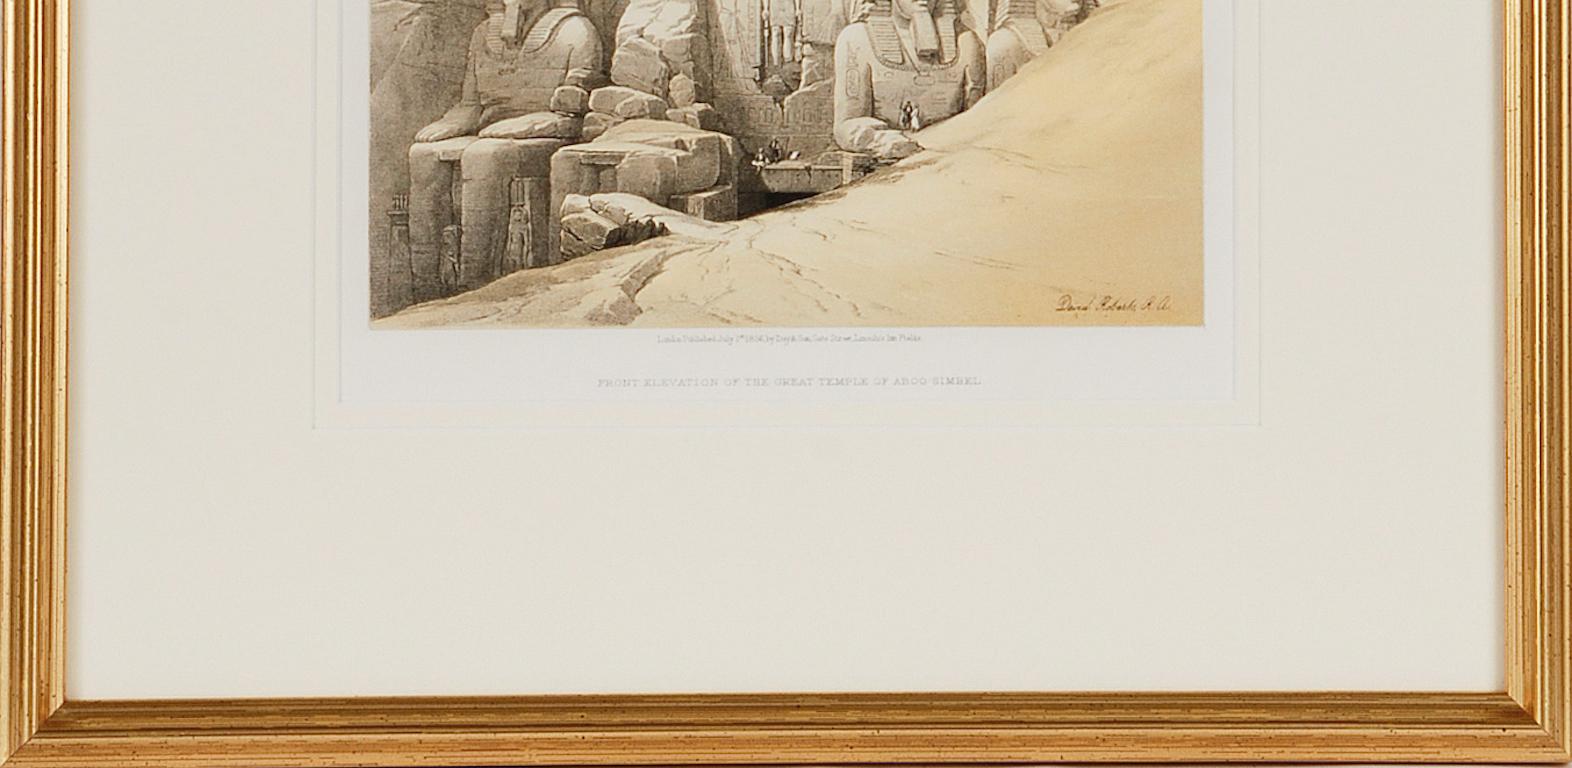 Abu Simbel in Egypt: An Original 19th Century Lithograph by David Roberts 2